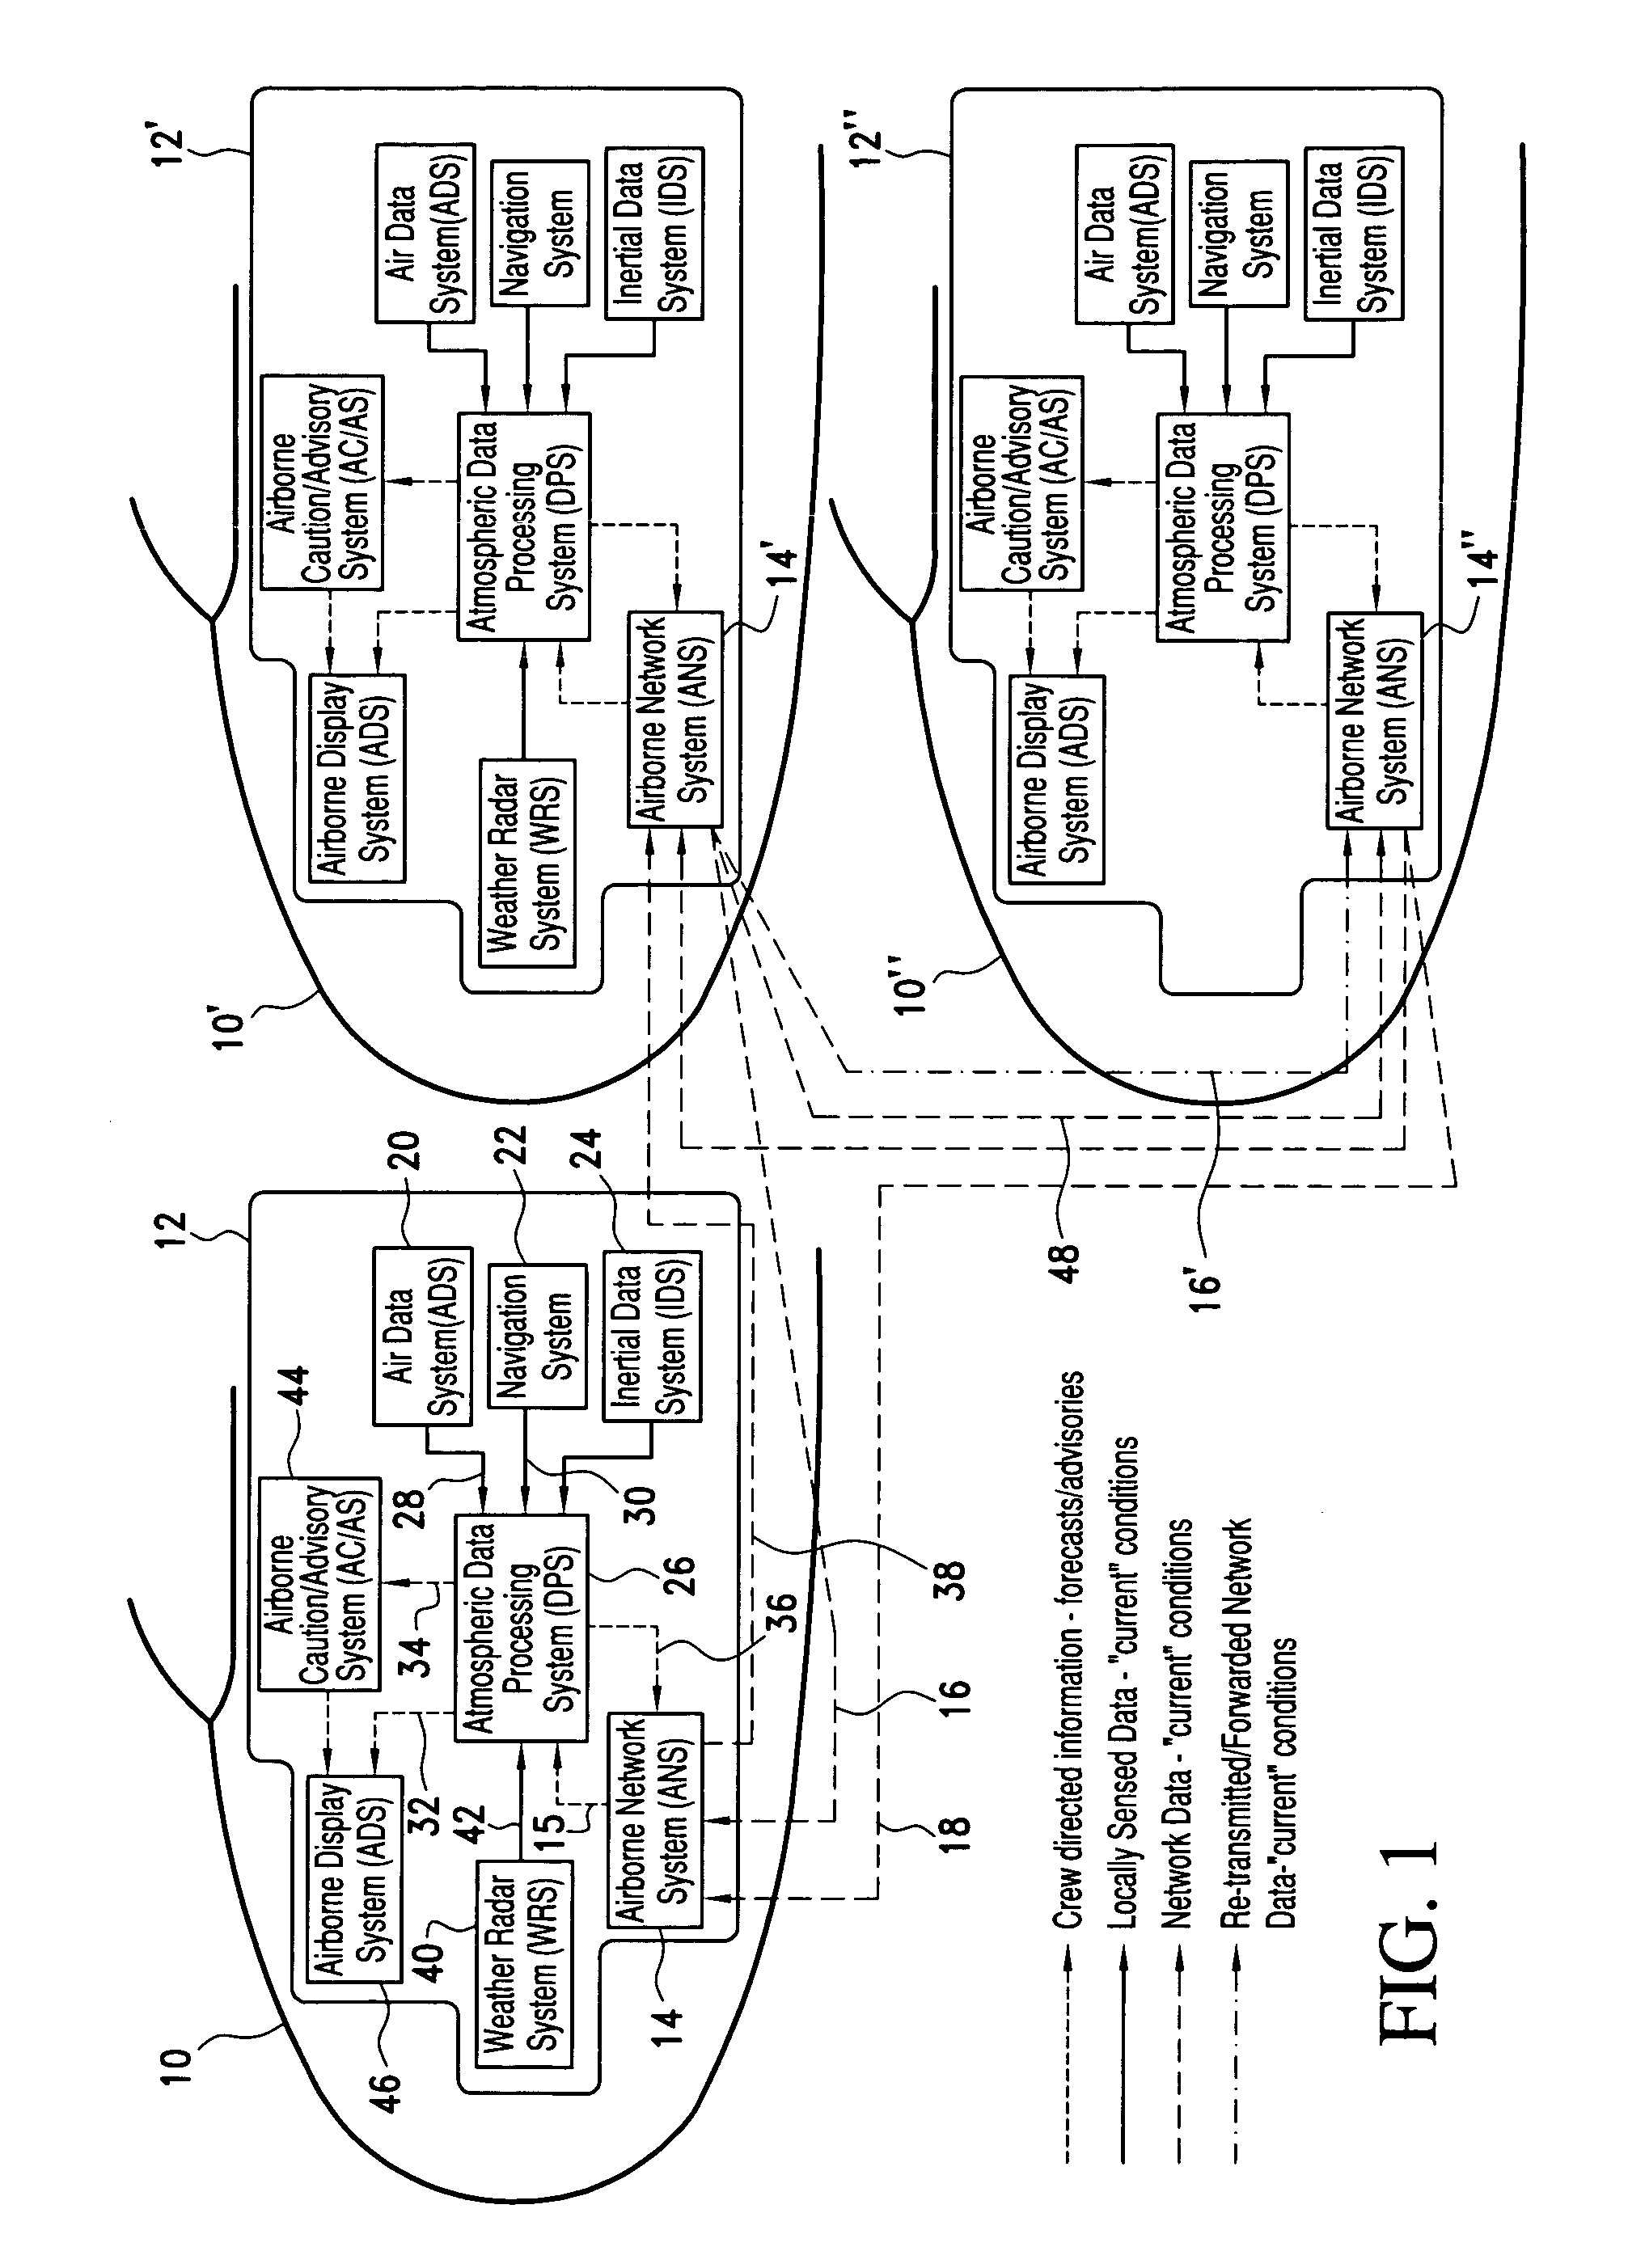 Atmospheric data aggregation and forecasting system